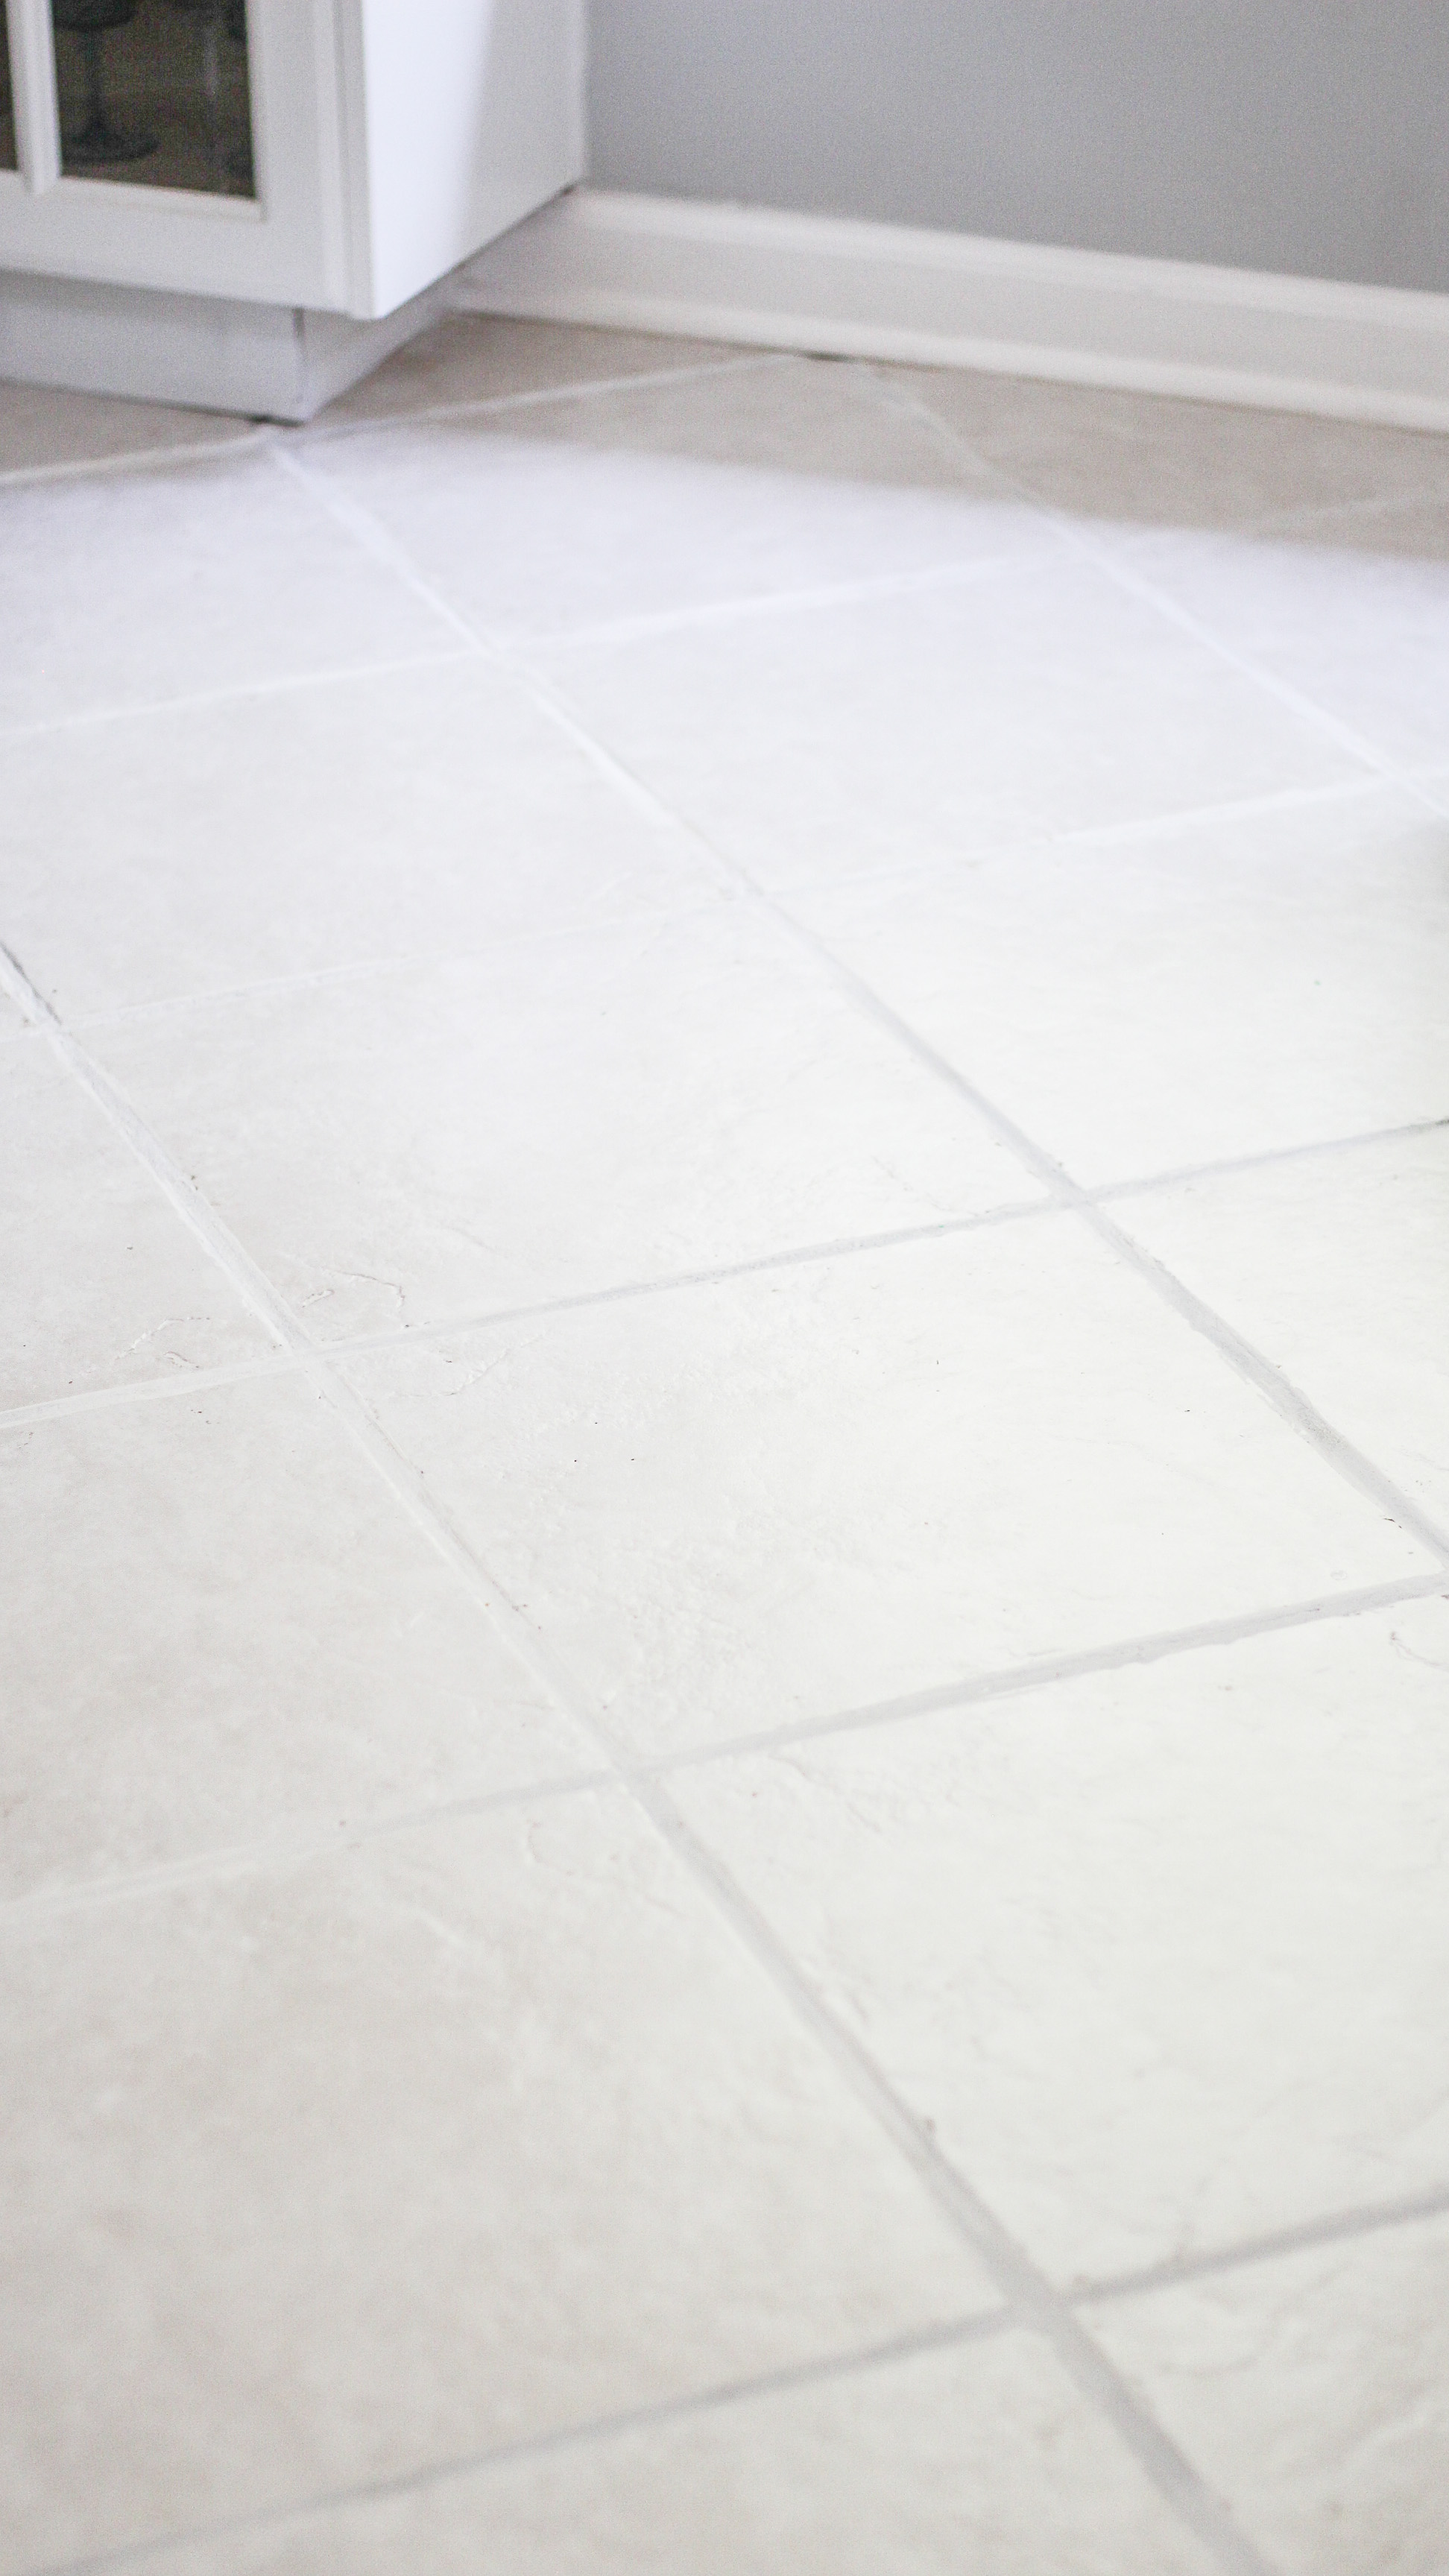 Neglected Tile Flooring, How To Deep Clean Tile Floors